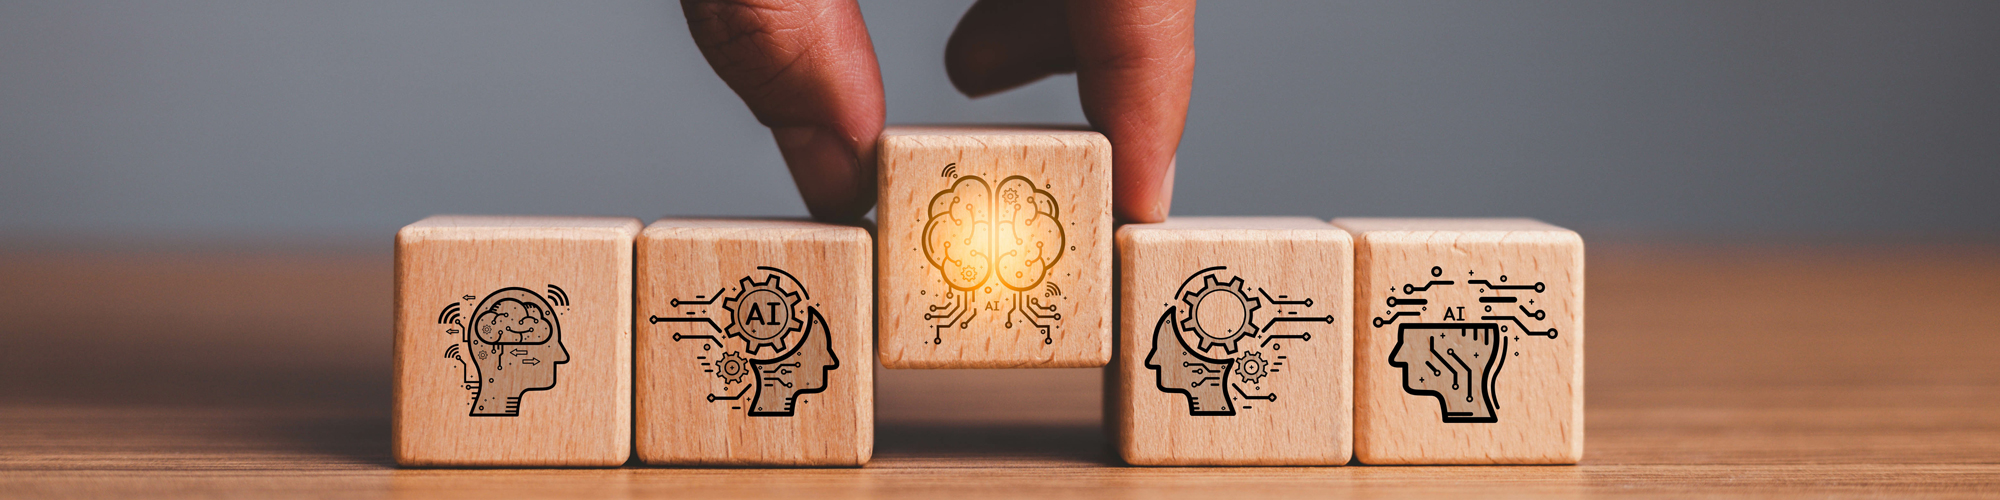 Person grabbing blocks with graphics of heads supposed to represent upskilling and reskilling